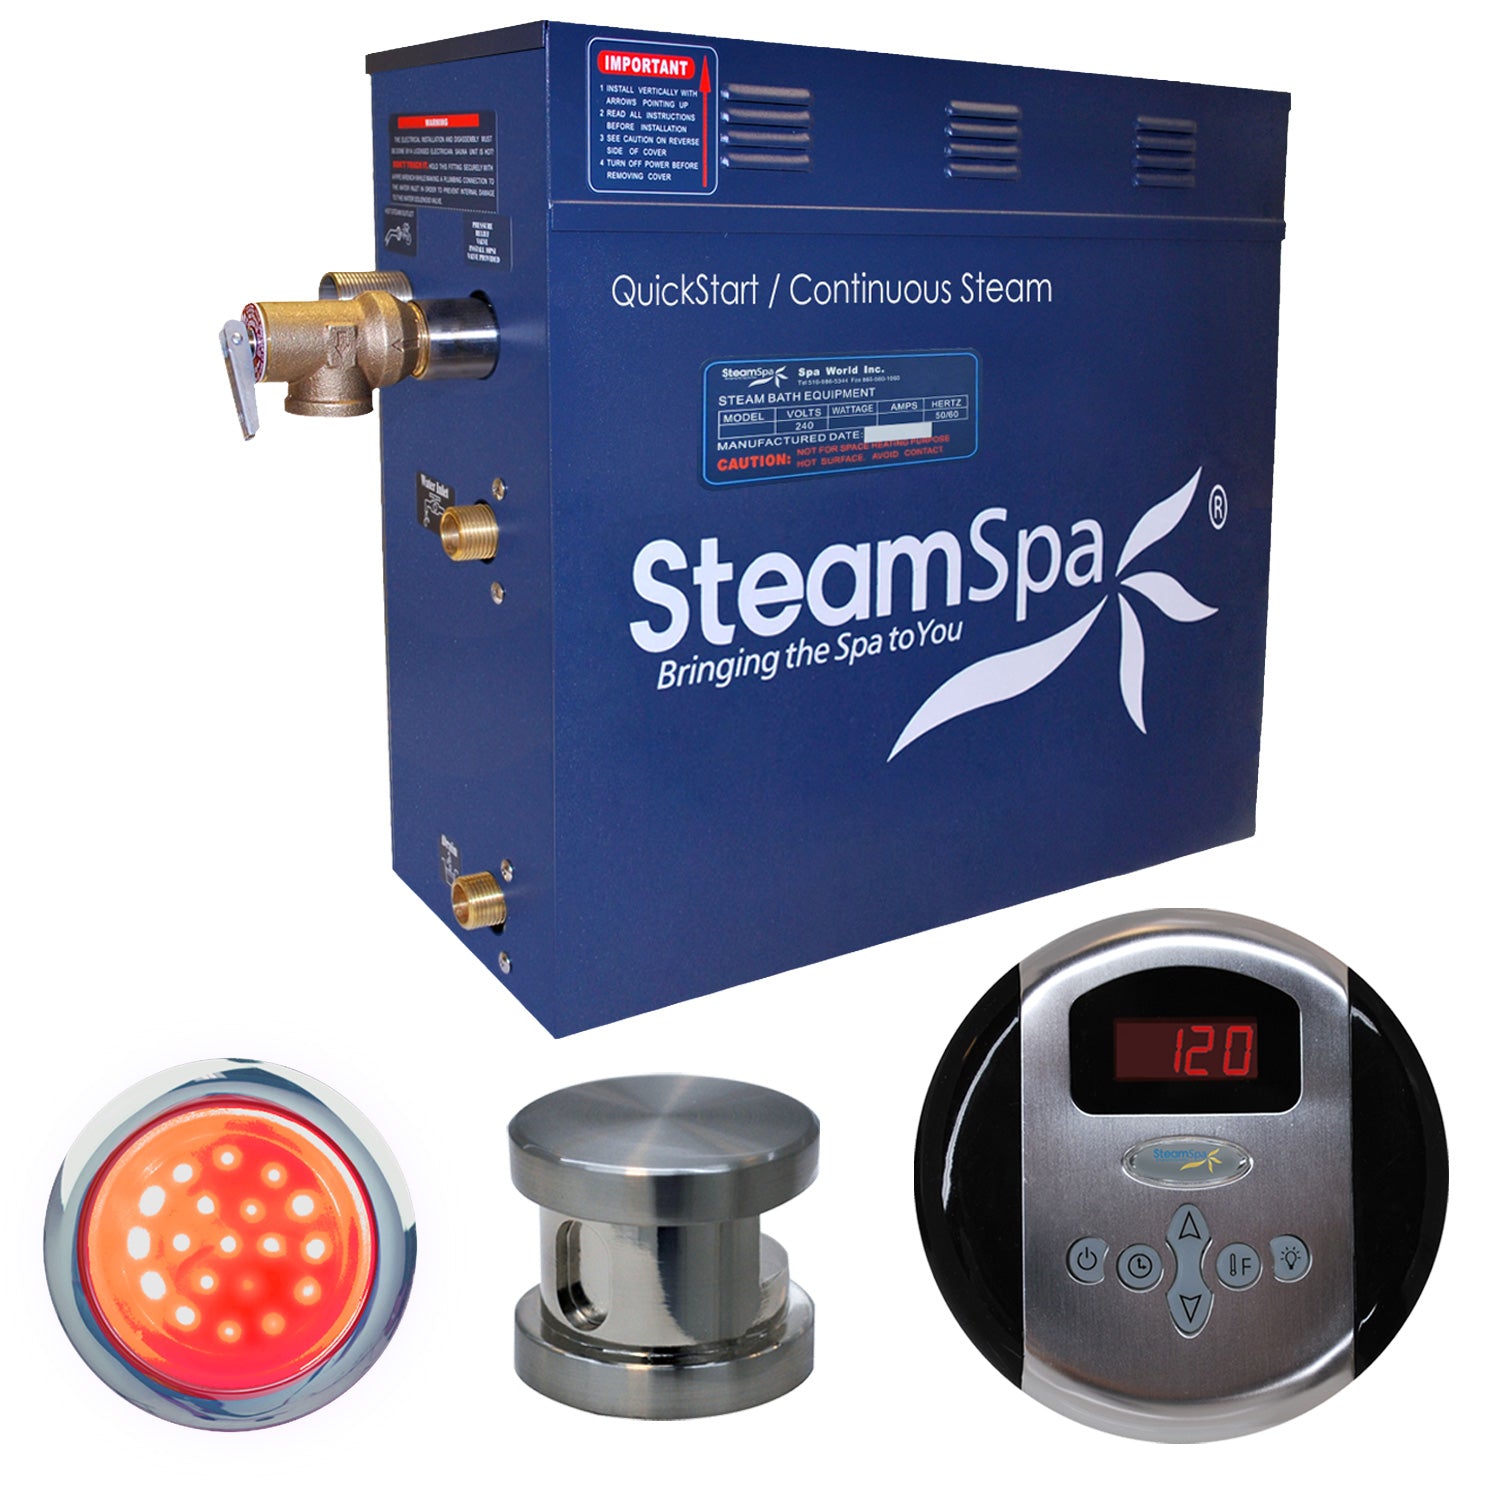 SteamSpa Indulgence 7.5 KW QuickStart Acu-Steam Bath Generator Package IN750 - Stainless Steel - Brushed Nickel finish - 16 in. L x 6.5 in. W x 14.5 in. H - Includes a 7.5kW QuickStart Acu-Steam Bath Generator, Control Panel, Brushed nickel Steam head, Chroma therapy Light, Pressure Relief Valve﻿ - Vital Hydrotherapy